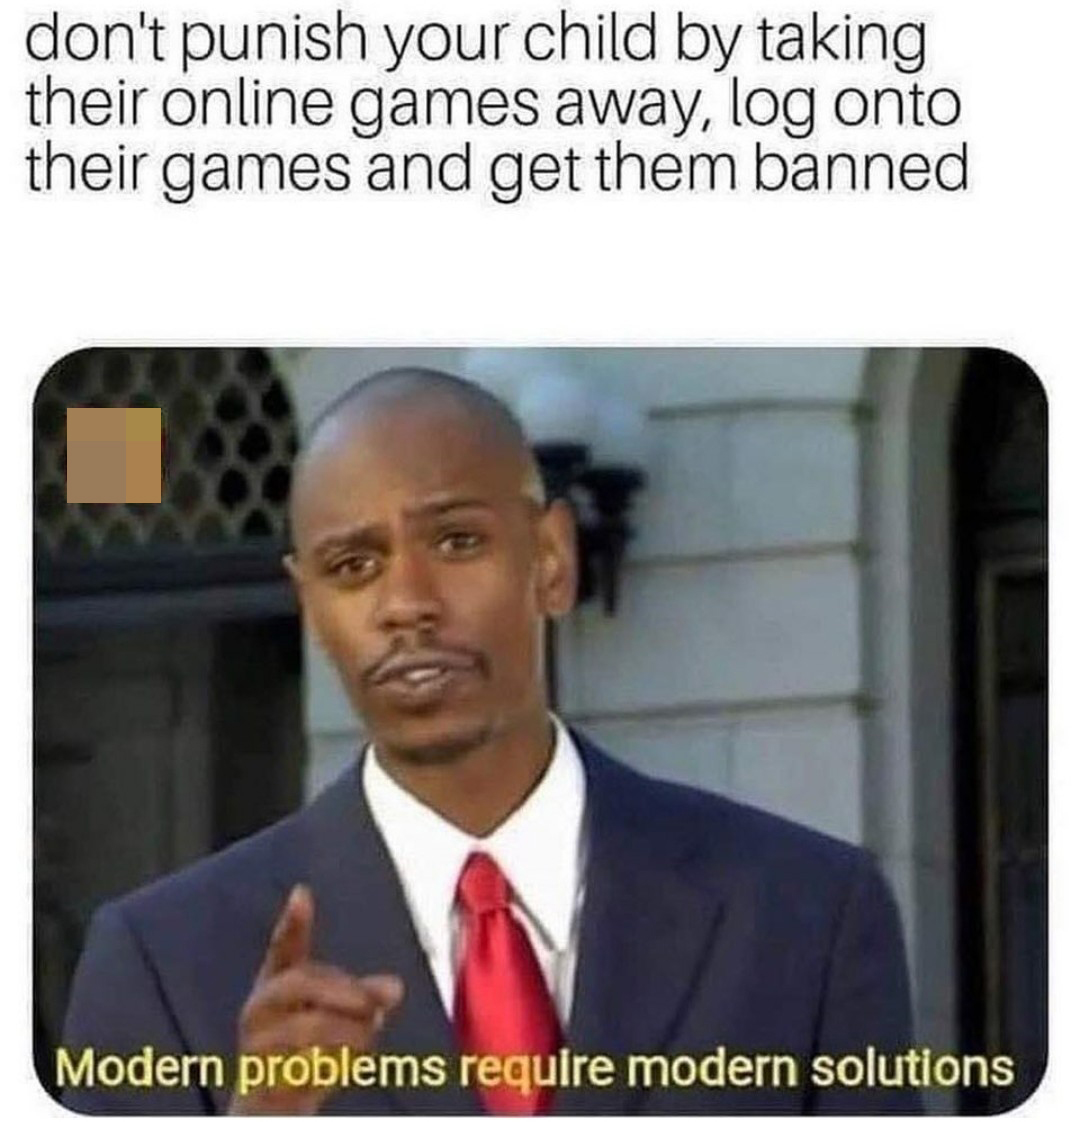 don't punish your child by taking their online games away, log onto their games and get them banned Modern problems require modern solutions